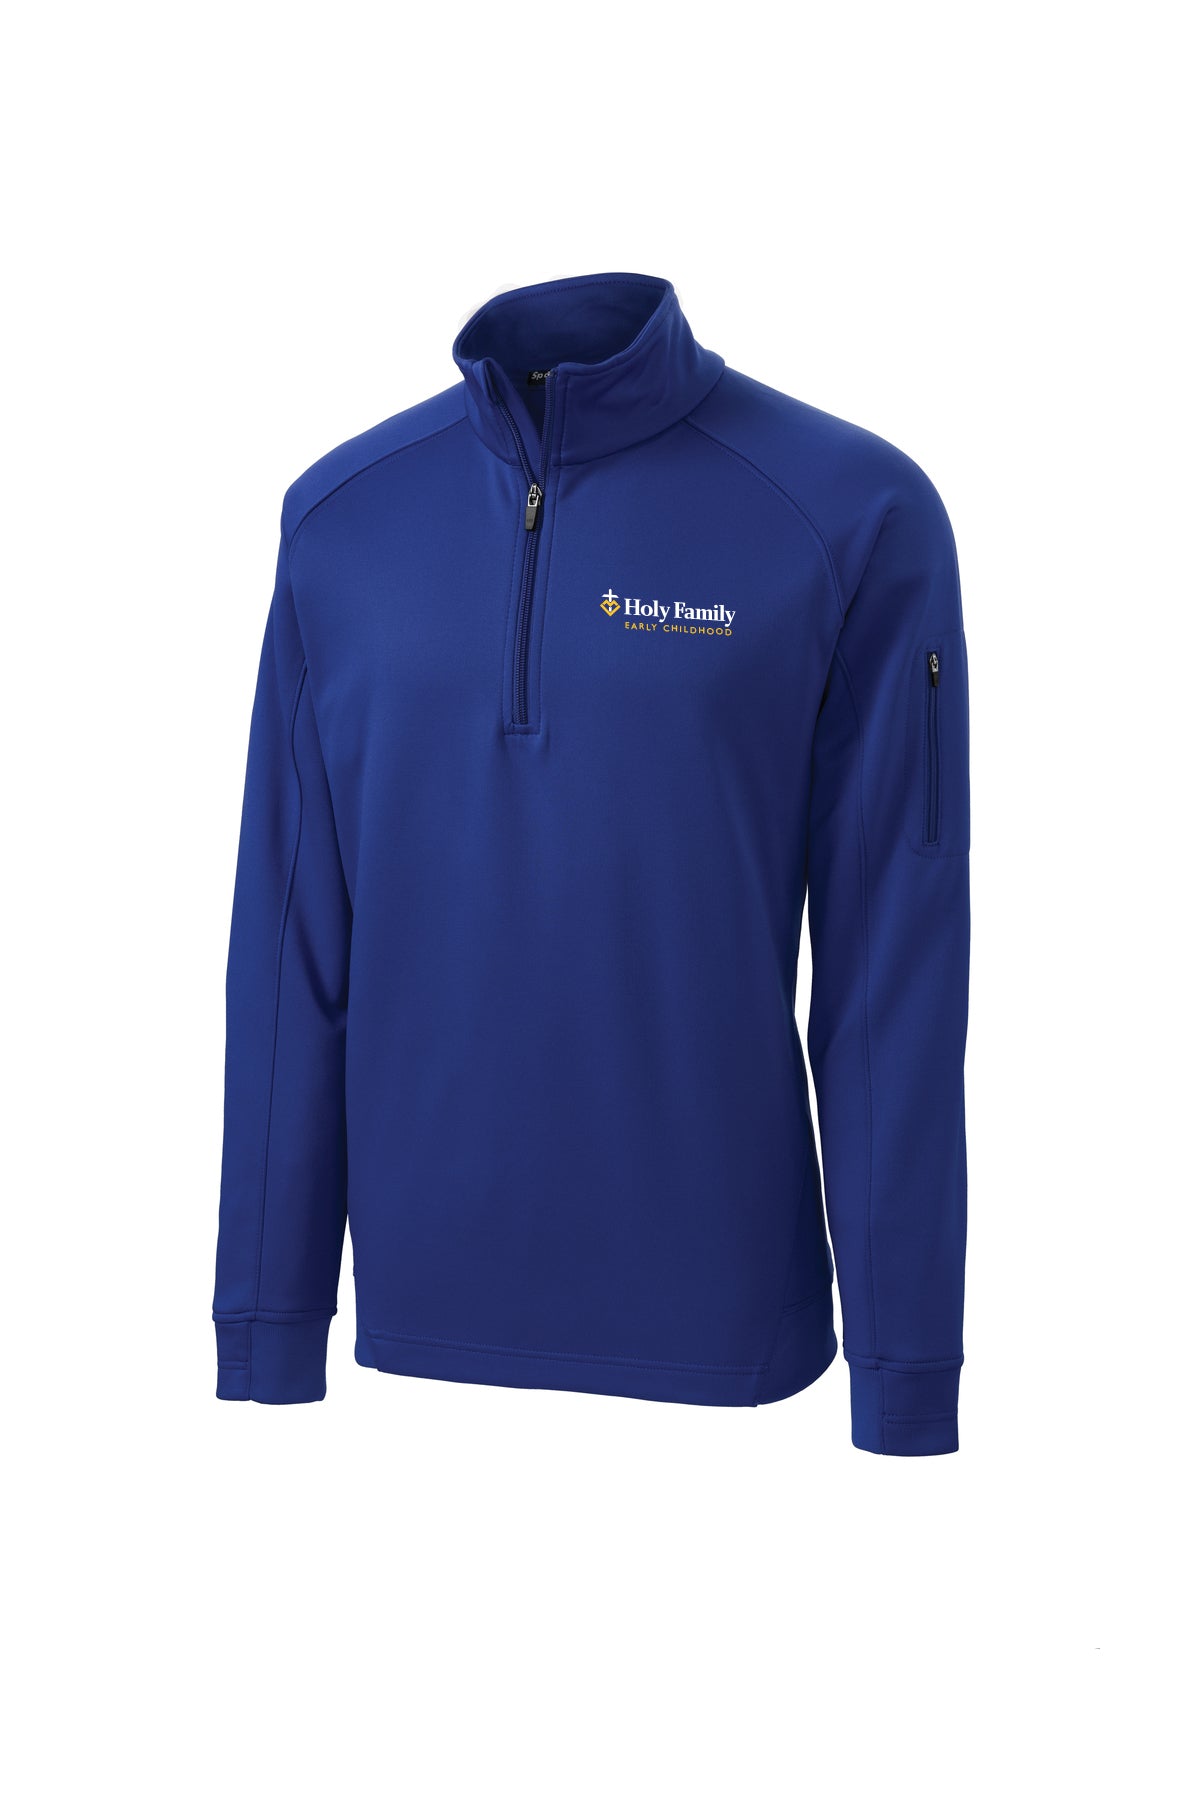 F247 - HOLY FAMILY EARLY CHILDHOOD STAFF - Adult Tech Fleece Pullover